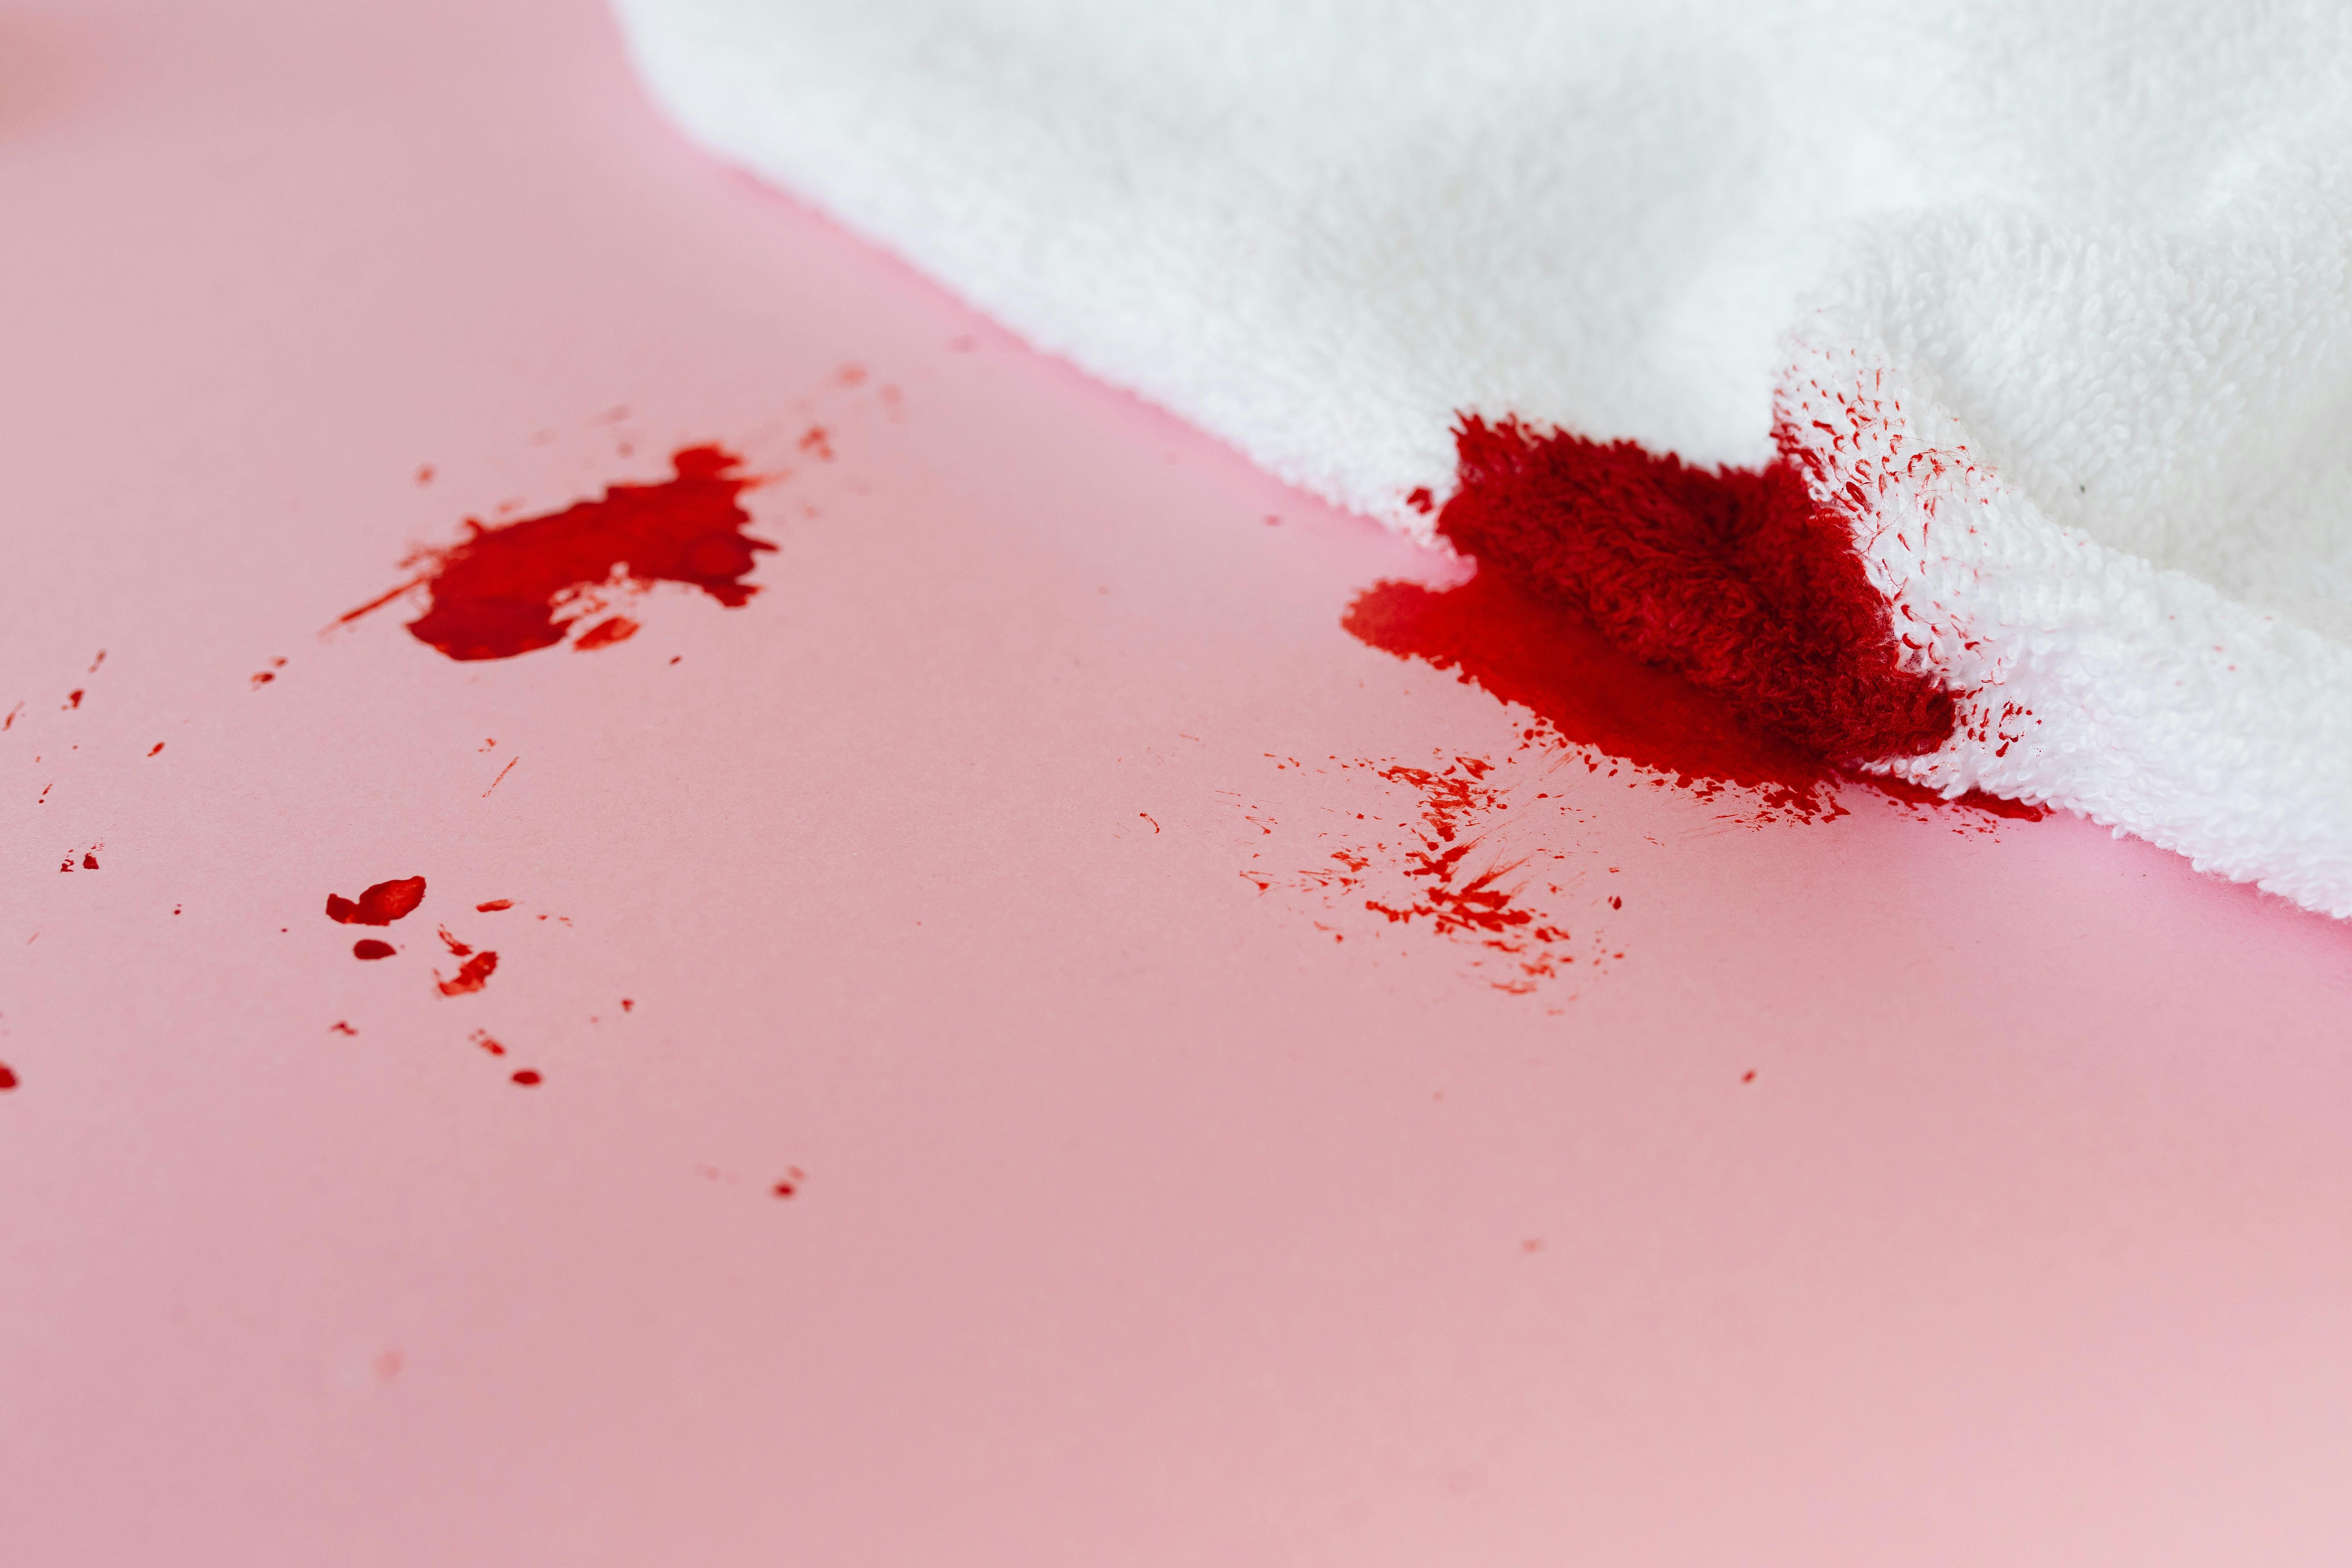 How to Get Blood Out of Sheets, saliva remove blood stains, pour hydrogen peroxide, clean blood stains, how to get blood out of sheets